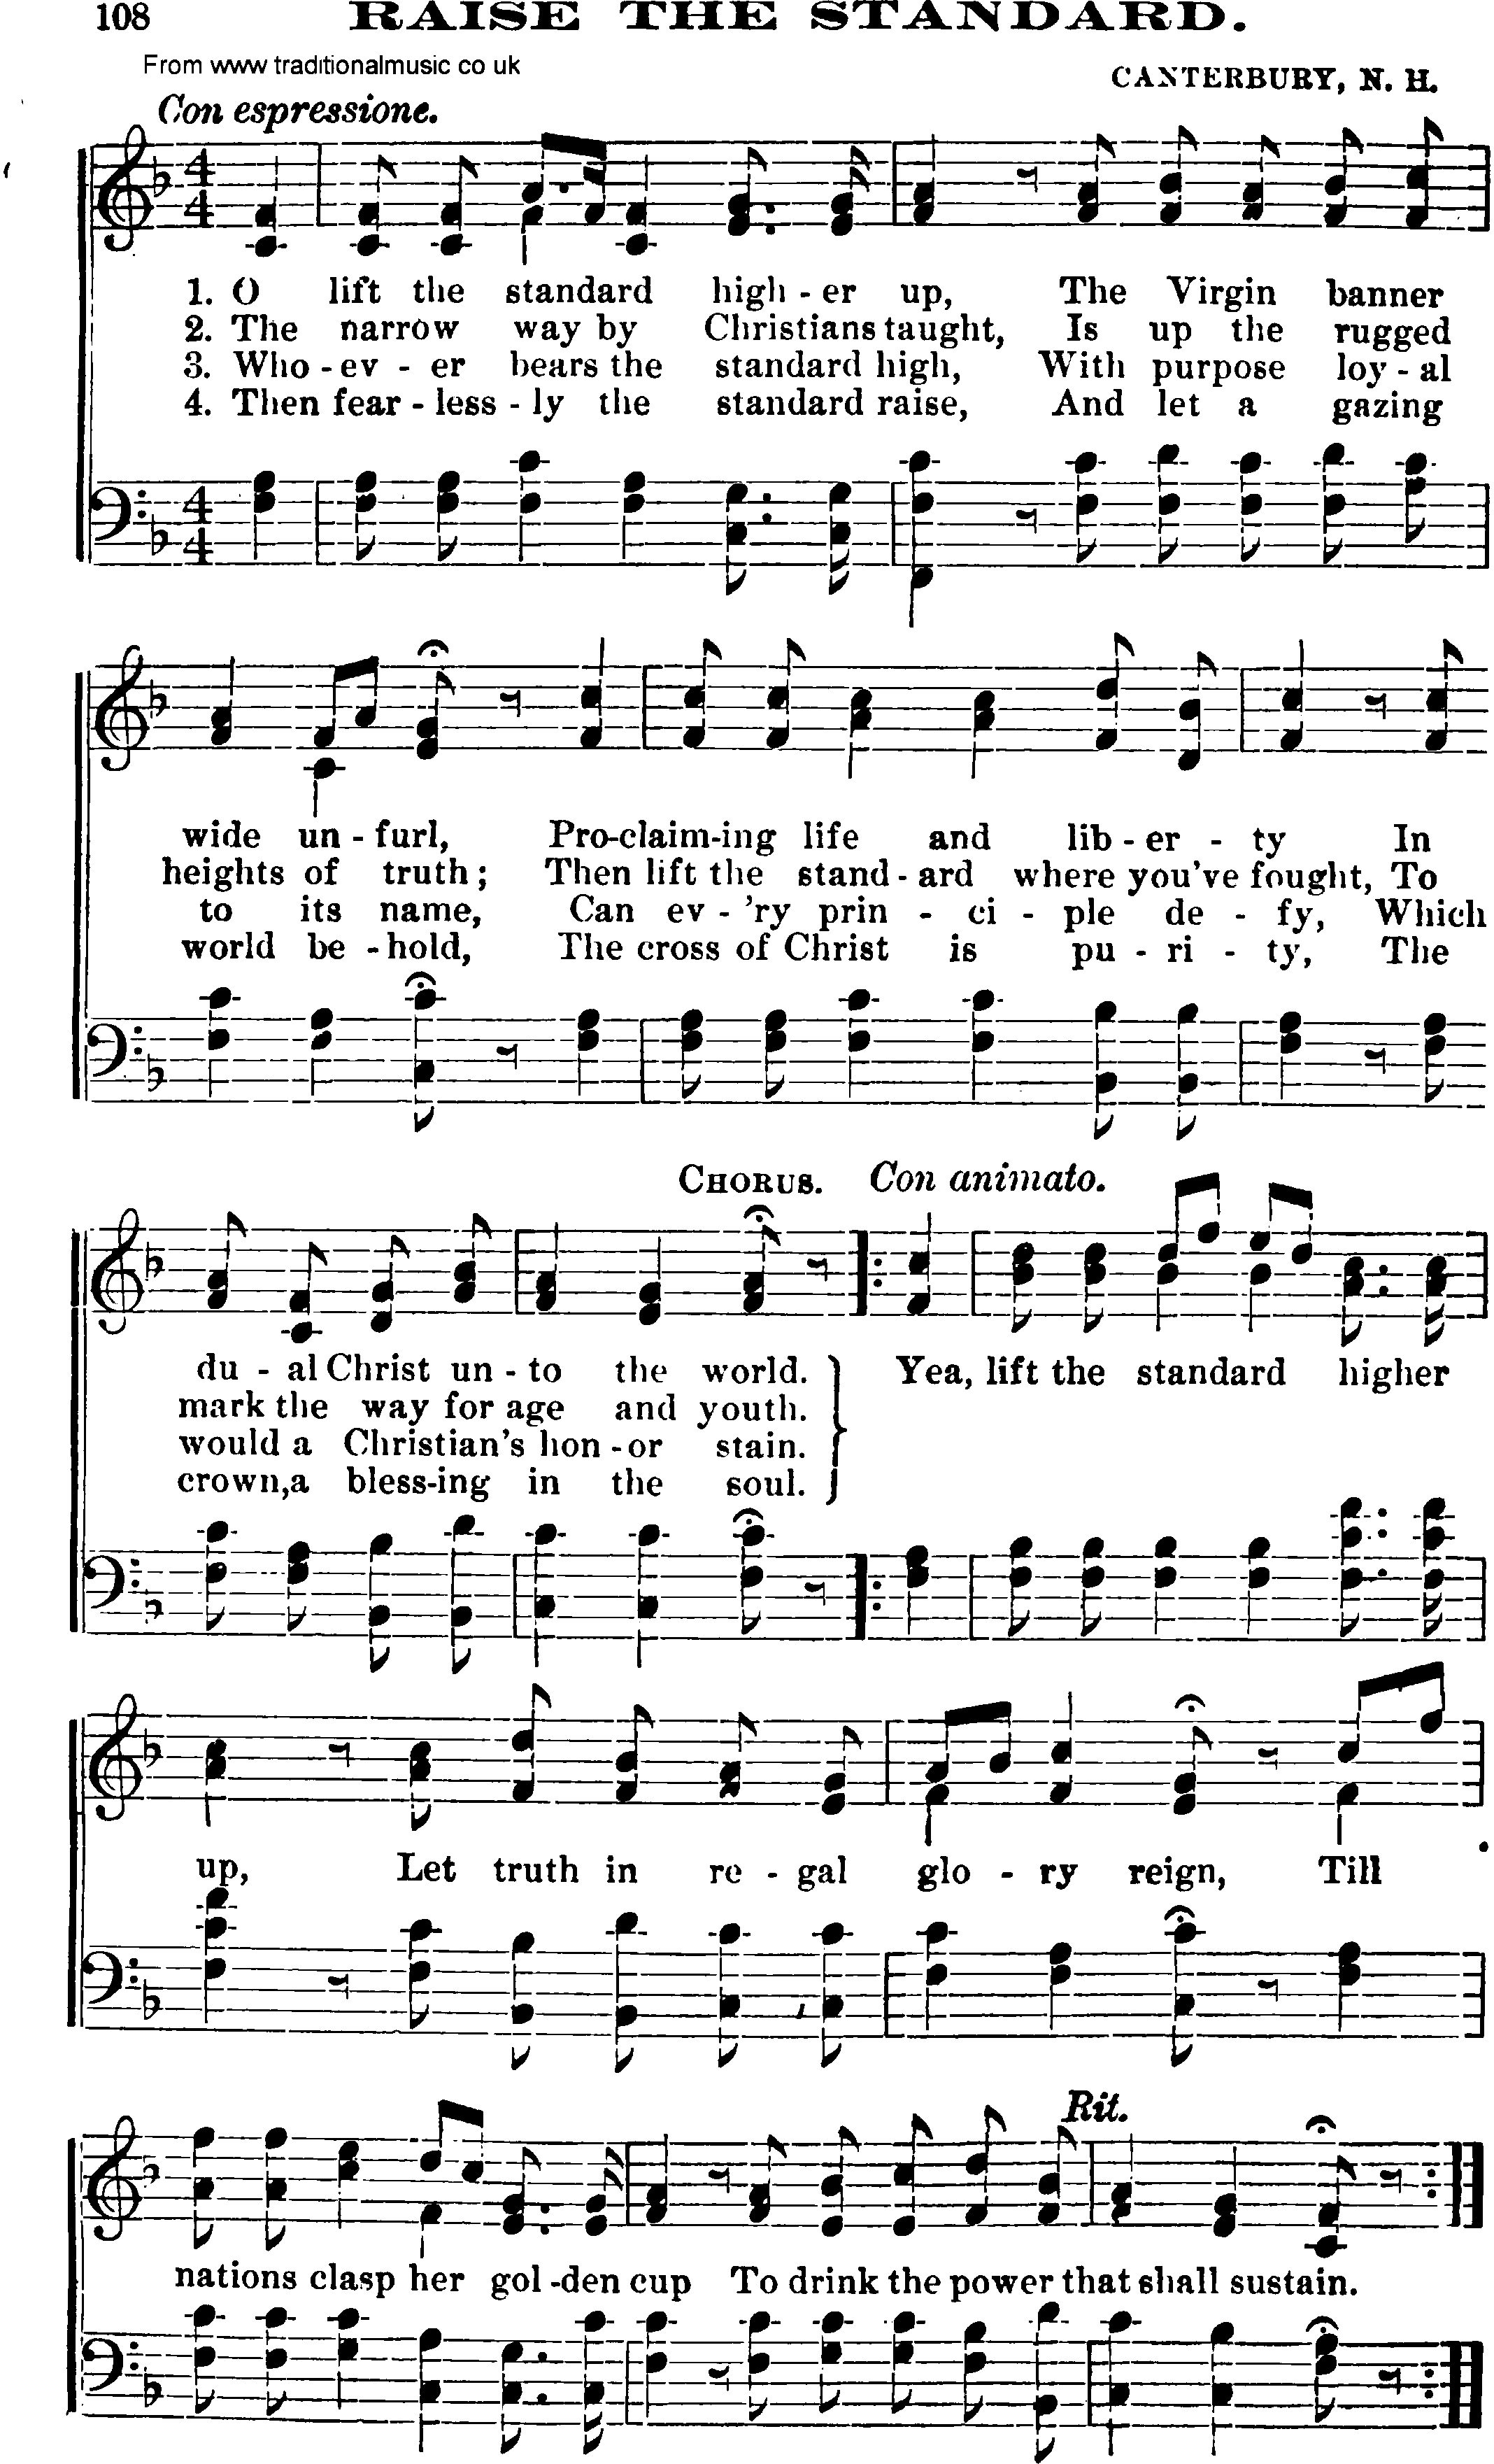 Shaker Music collection, Hymn: Raise The Standard, sheetmusic and PDF